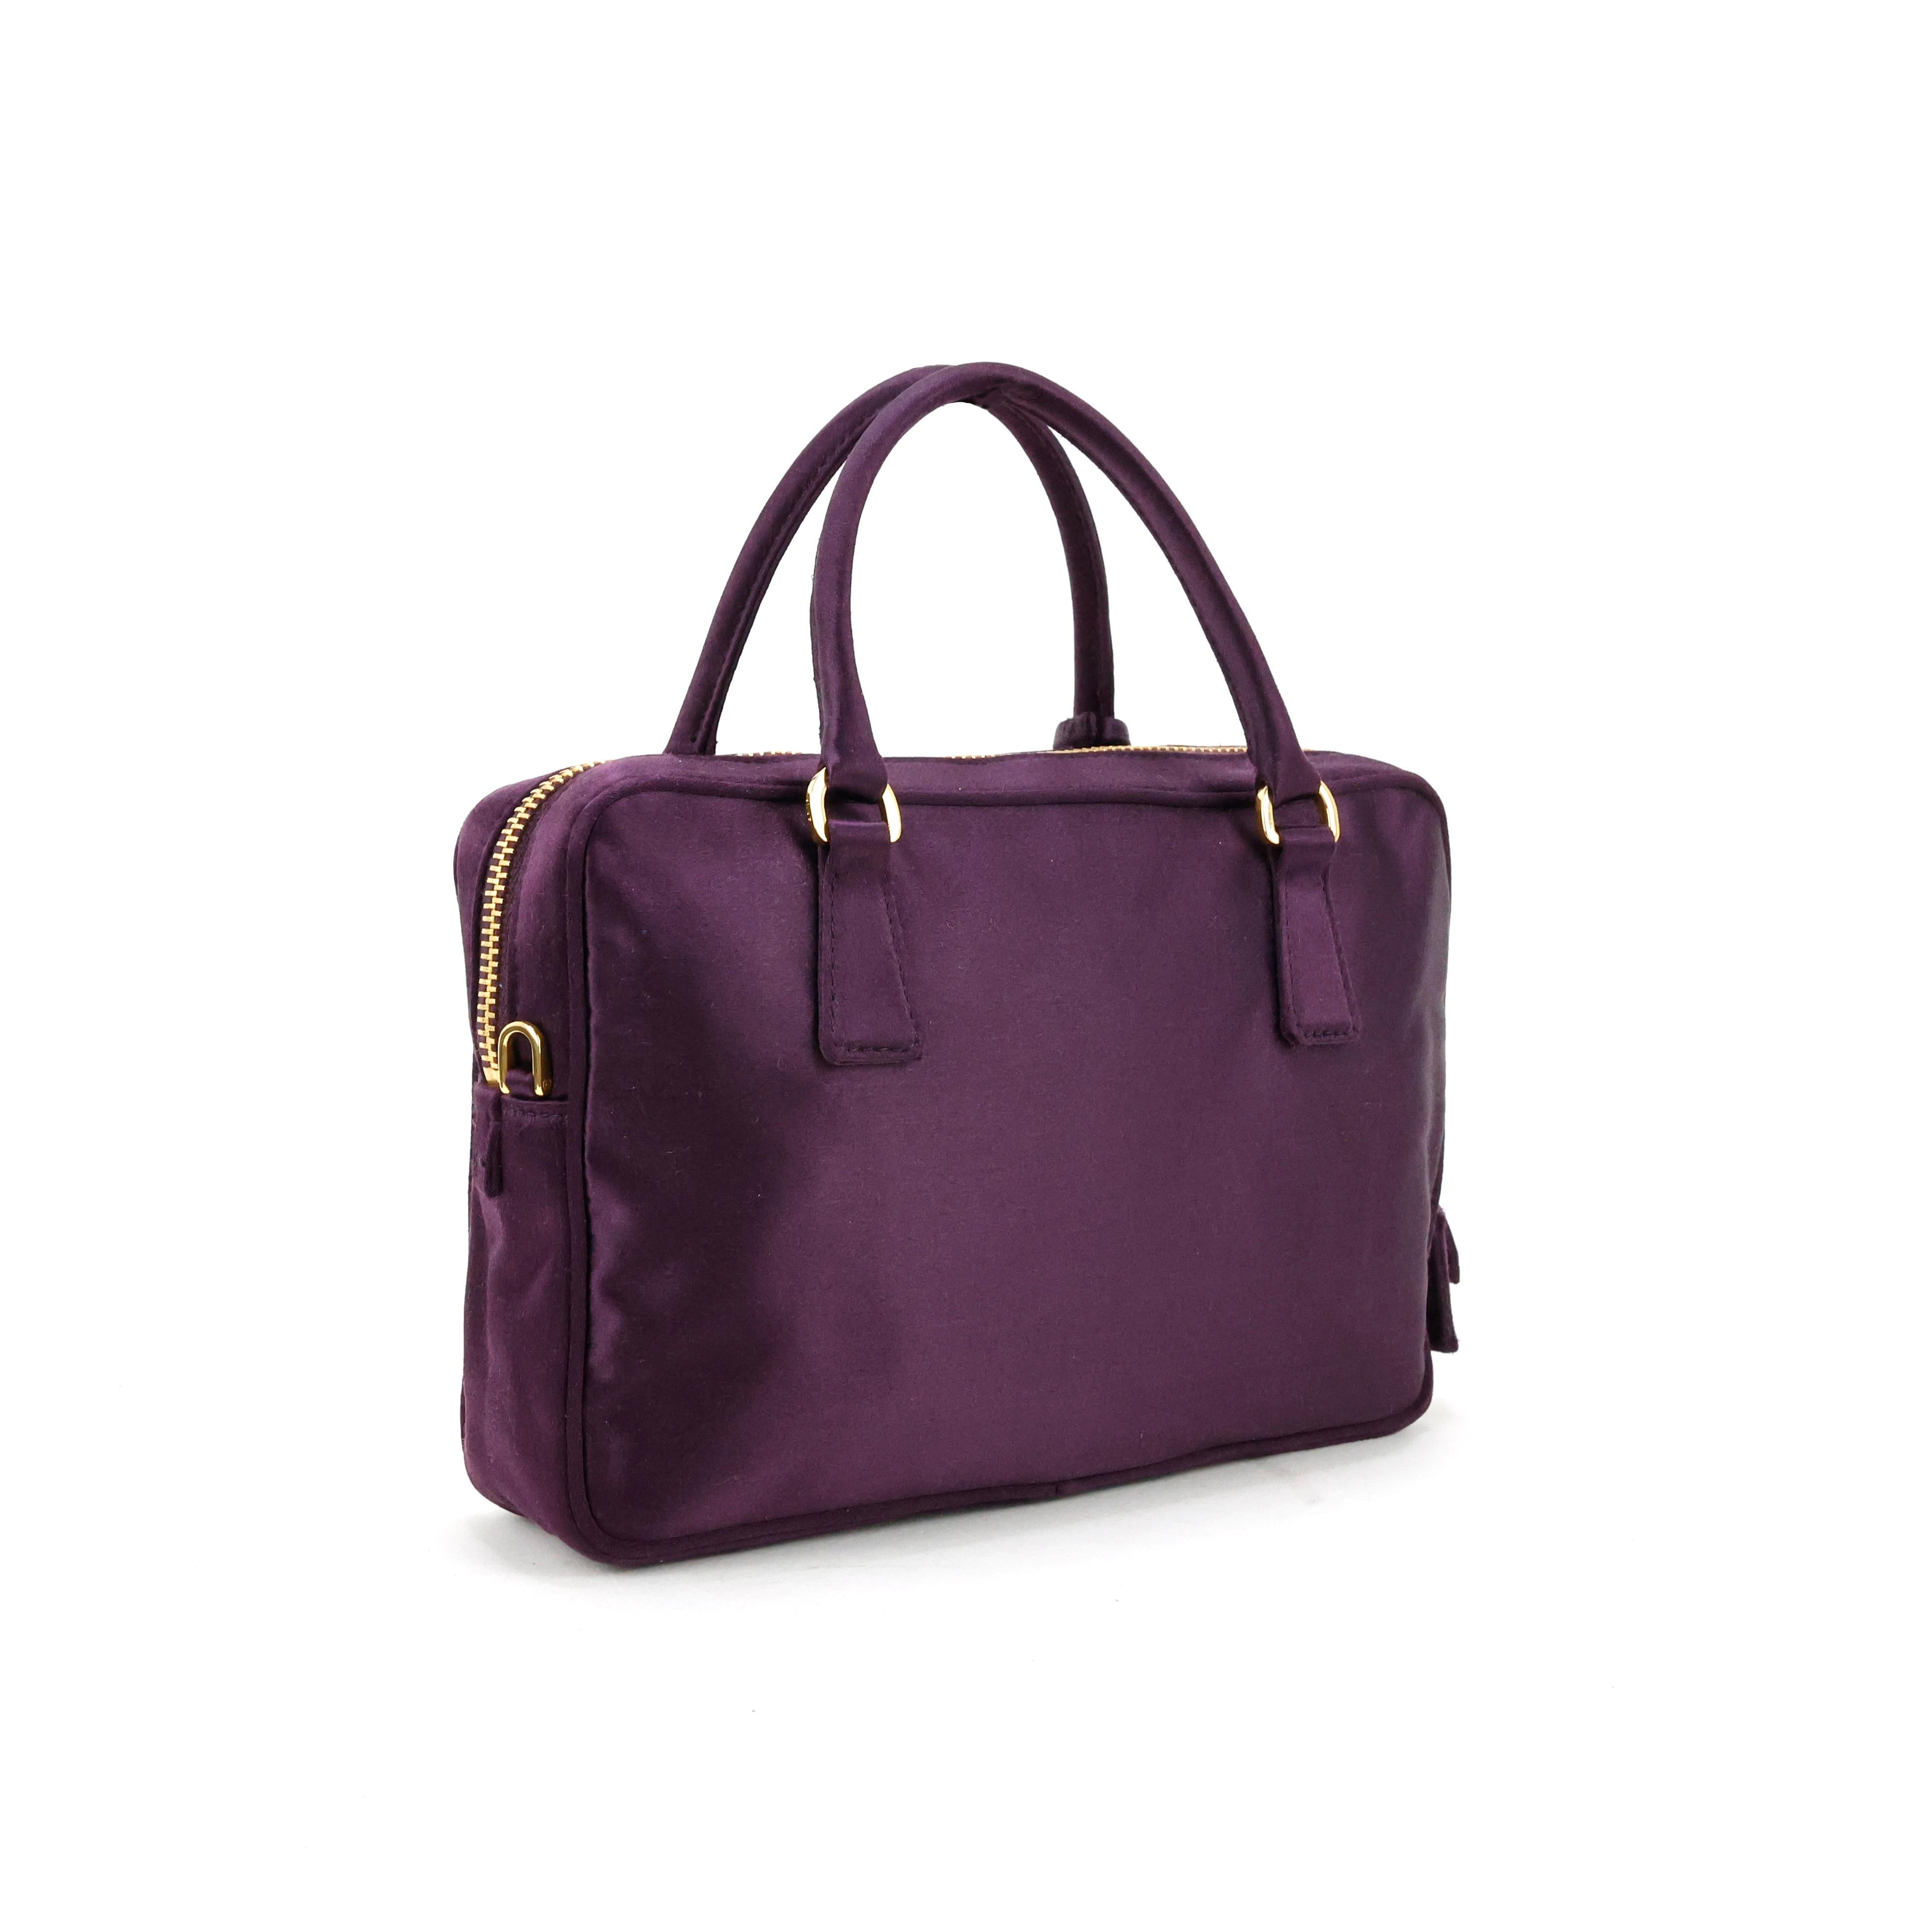 Prada mini bag in silk color purple, gold hardware. Can be carried crossbody or by hand.

Condition:
Excellent.

Packing/accessories:
Box, dustbag, original strap, lock and key.

Measurements:
20cm x 14cm x 5cm